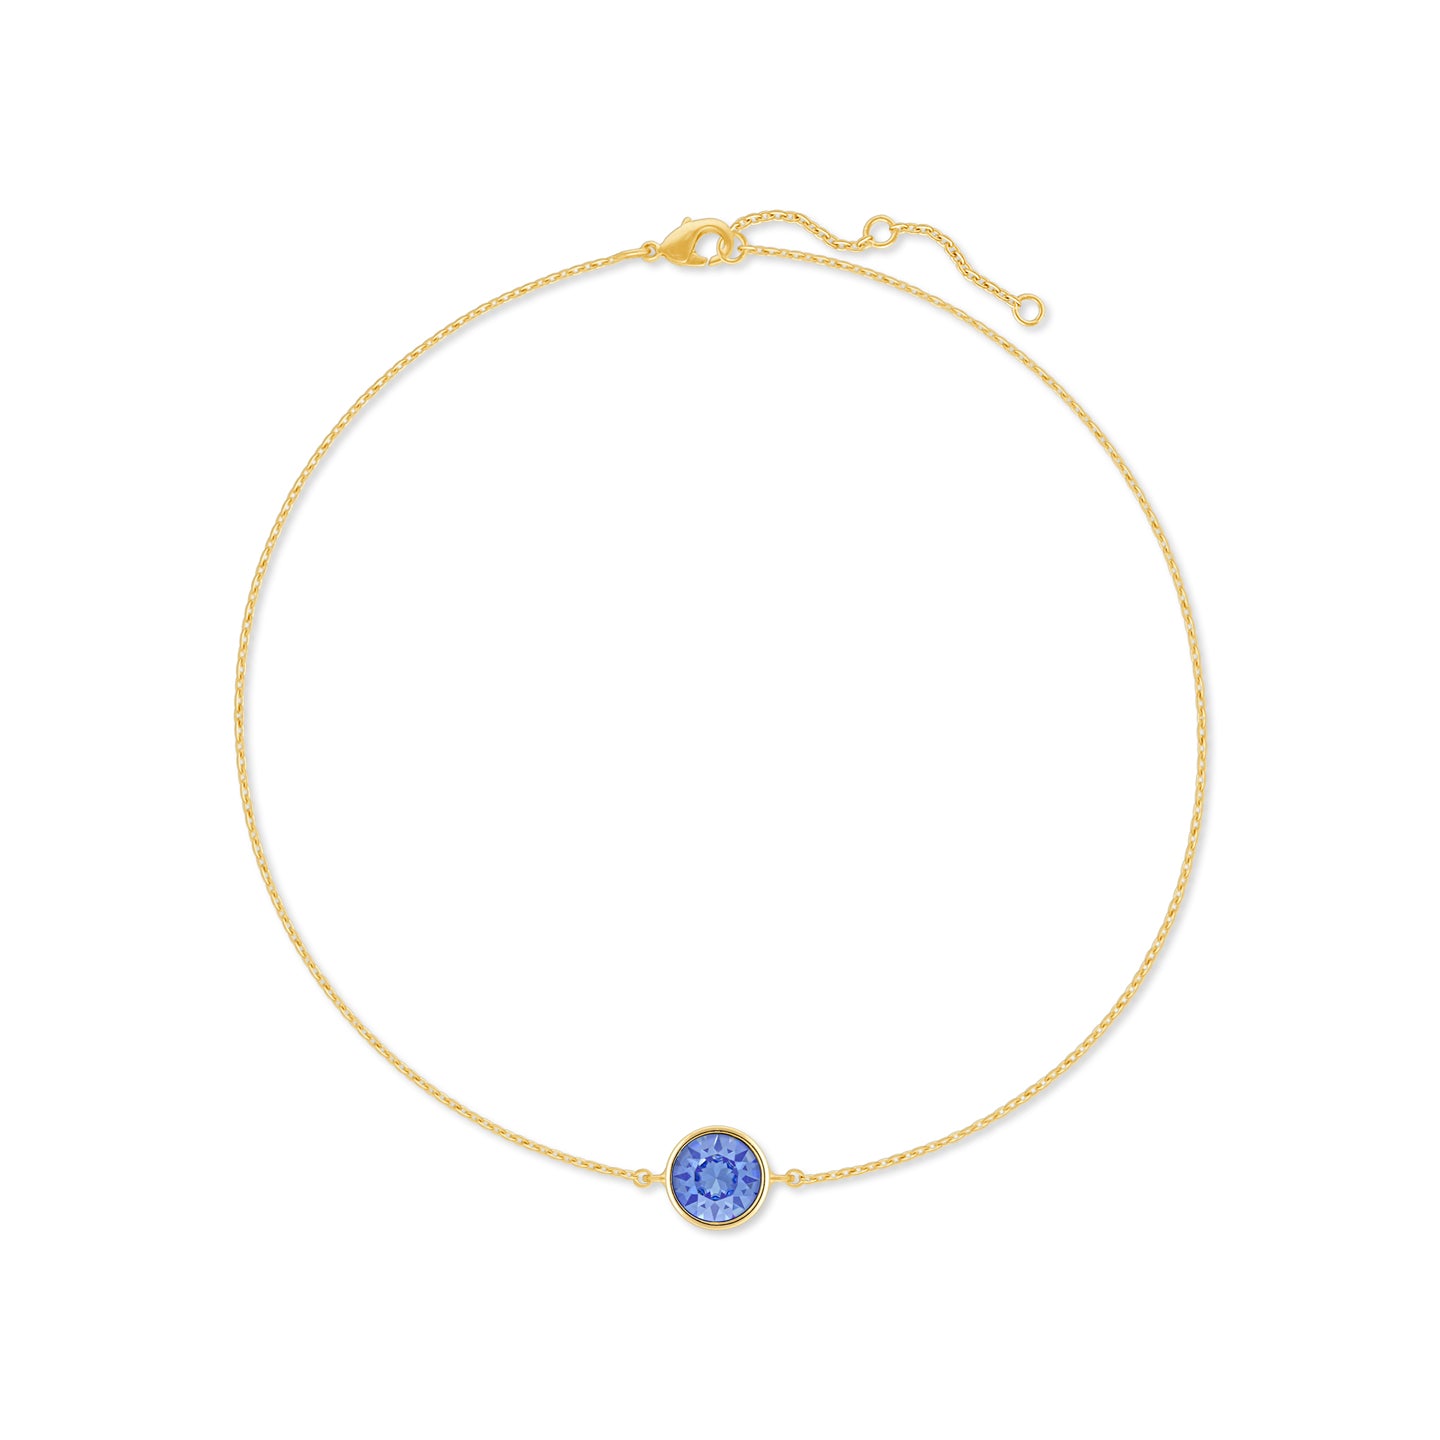 Harley Chain Bracelet with Blue Light Sapphire Round Crystals from Swarovski Gold Plated - Ed Heart